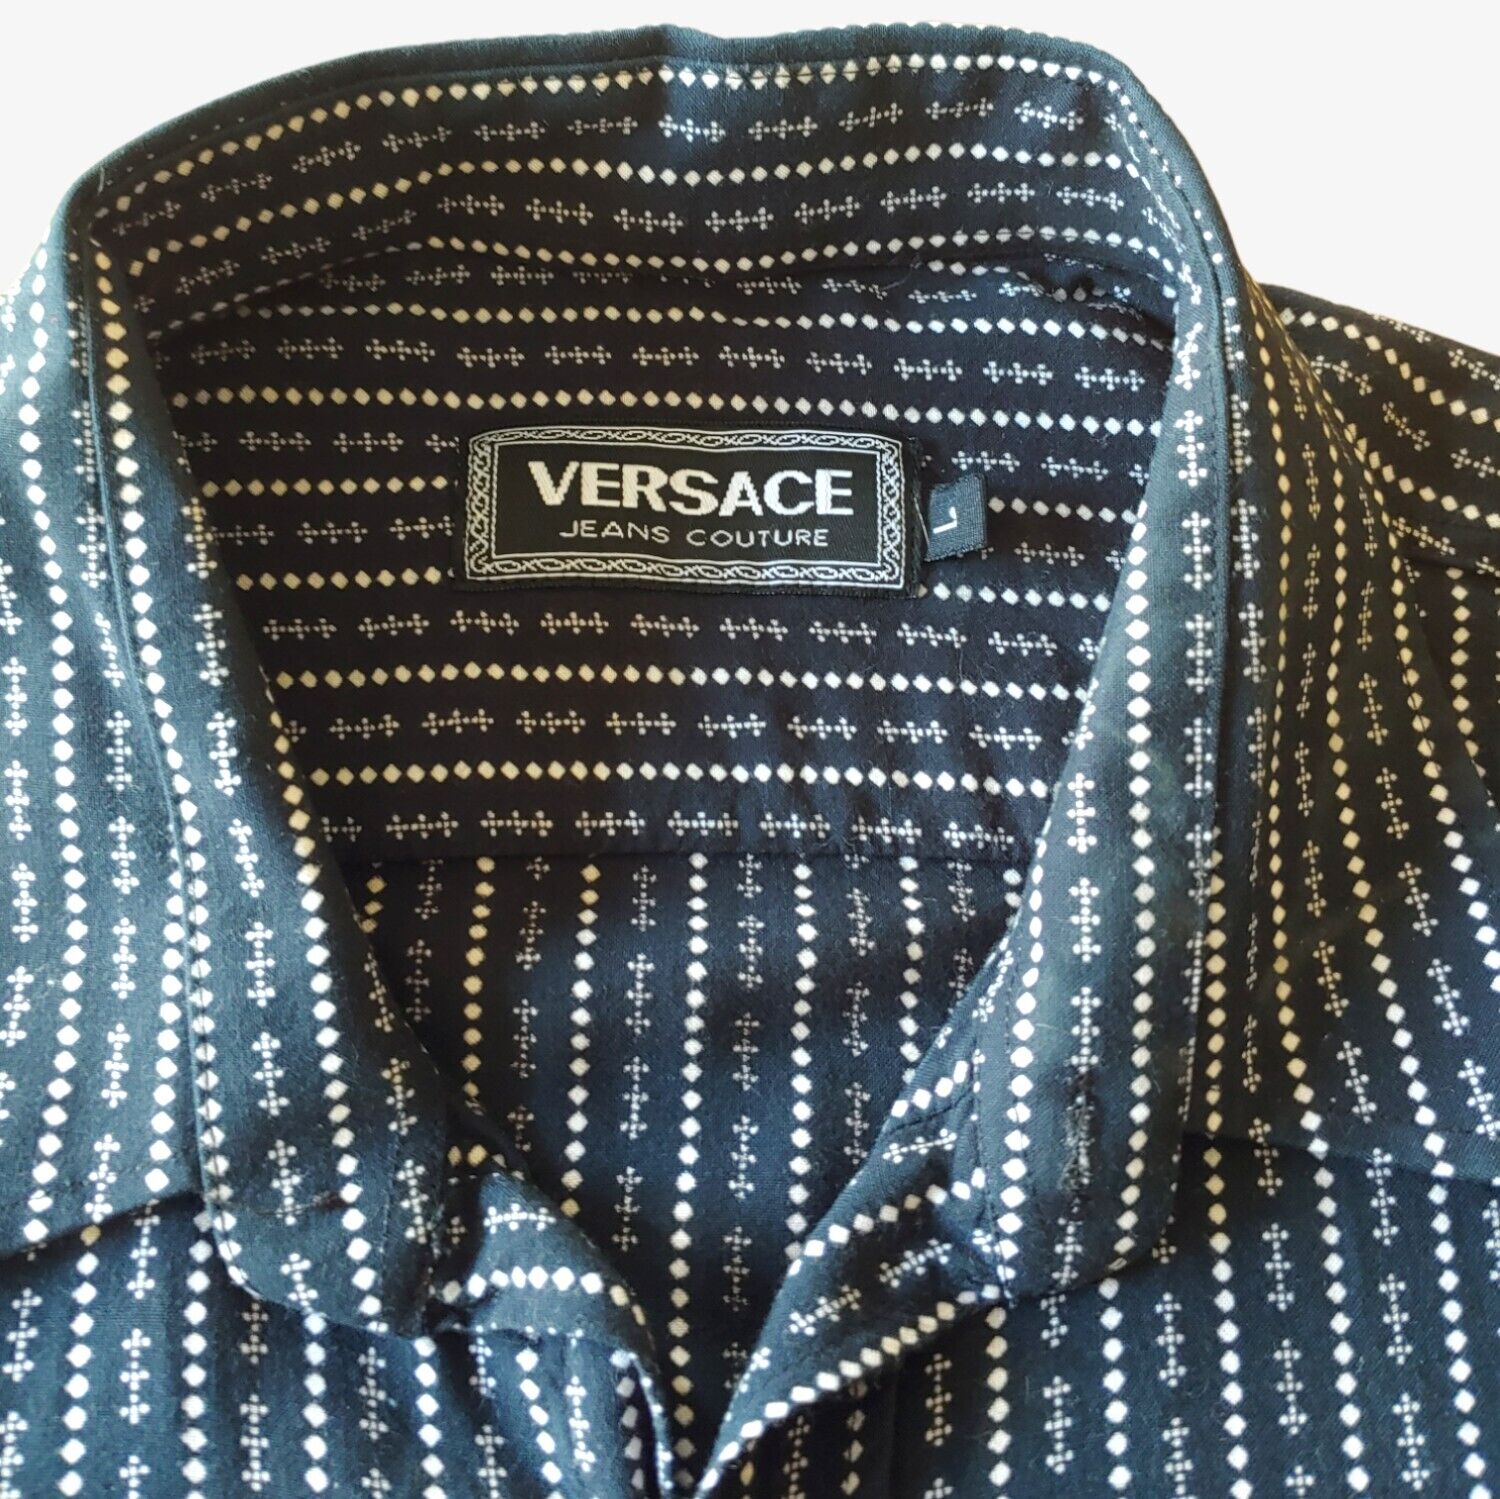 Vintage 1990s Versace Jeans Couture Pearl Patterned Print Silk Cotton Shirt With Medusa Head Buttons Label - Casspios Dream